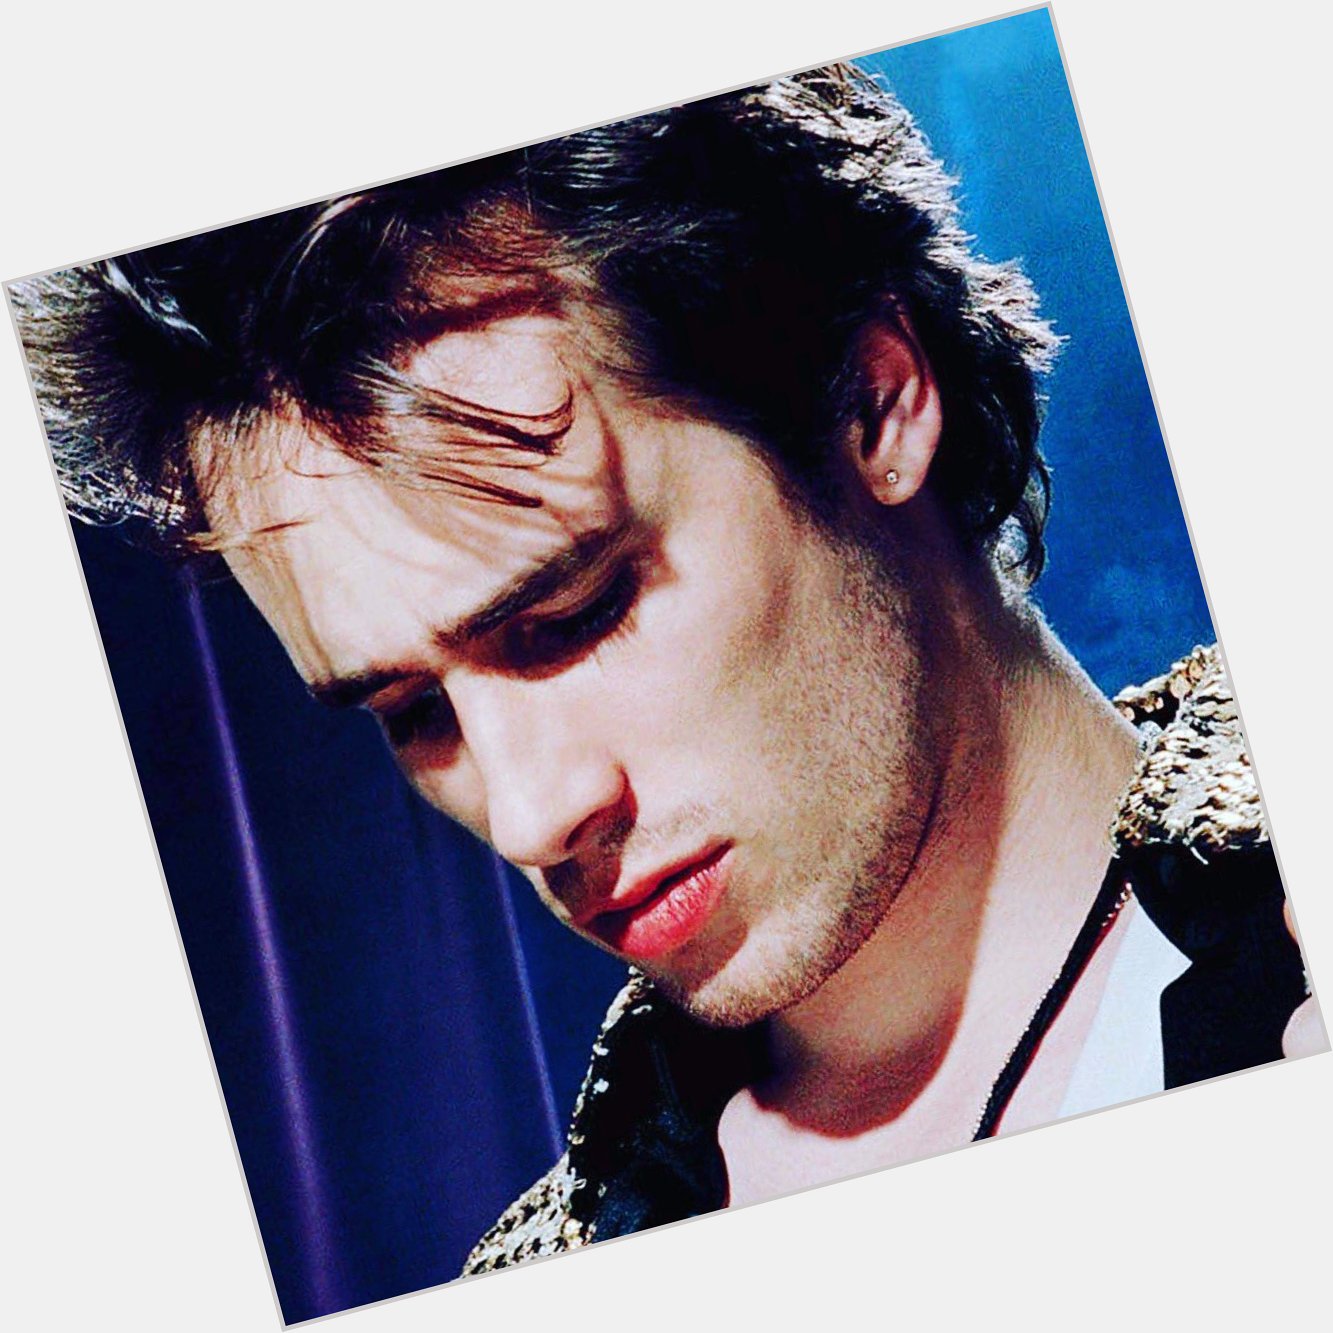 Happy birthday, Jeff Buckley, you are forever missed. 